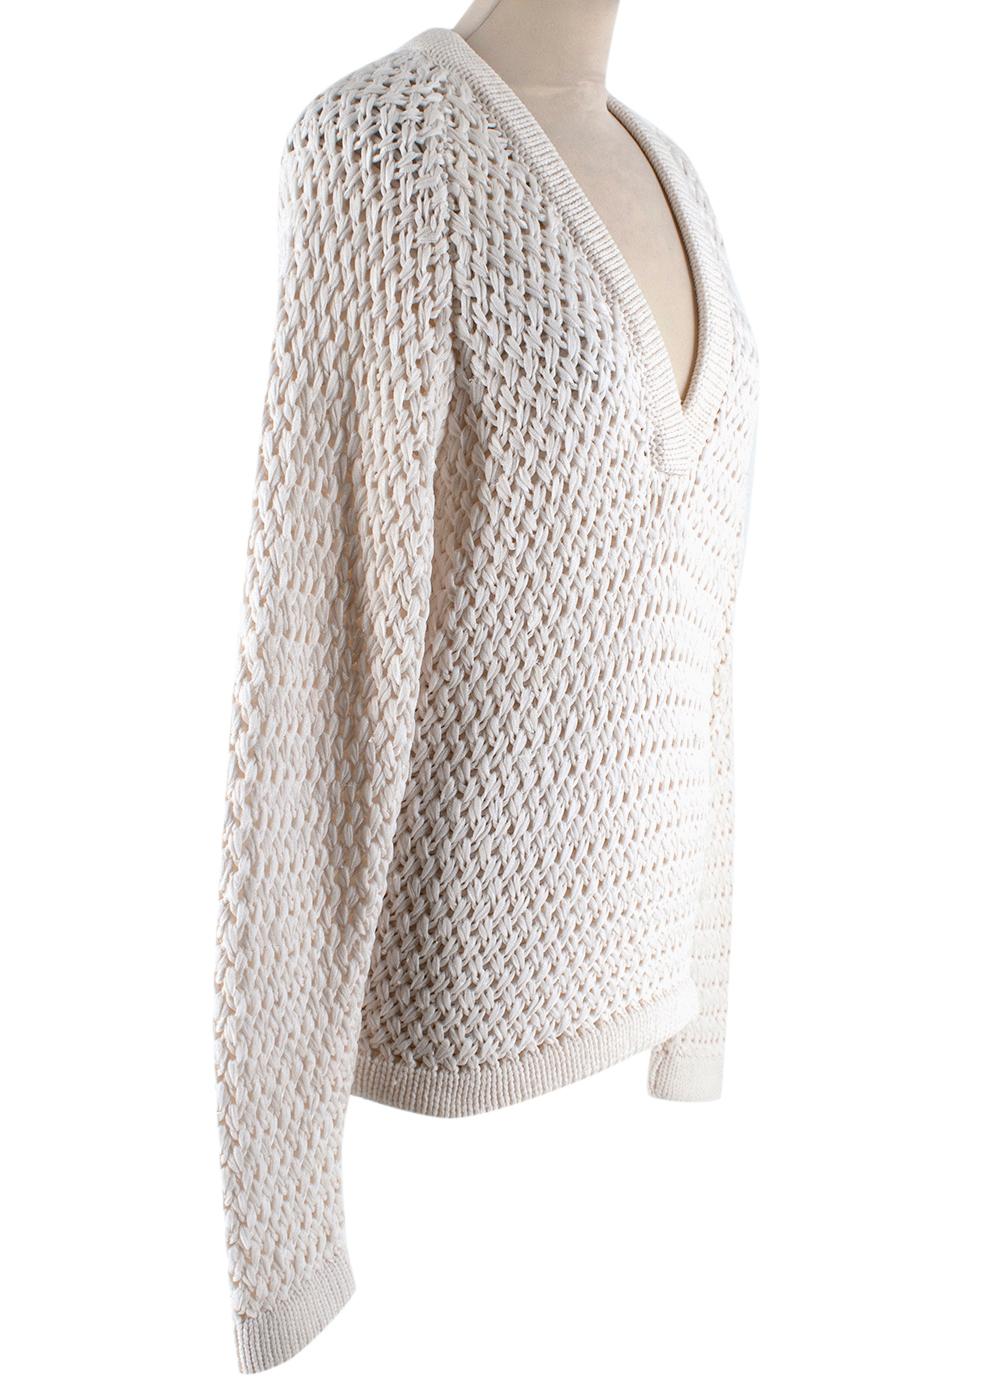 Balmain Ivory Glitter Chunky Knit Jumper

- Chunky sheer cable knit with cream silk glittery woven twills
- V cross-over neckline with smaller cable knit design
- Mid weight material
- Soft blend of silk

Fabric Composition:
57% Polyamide
43%